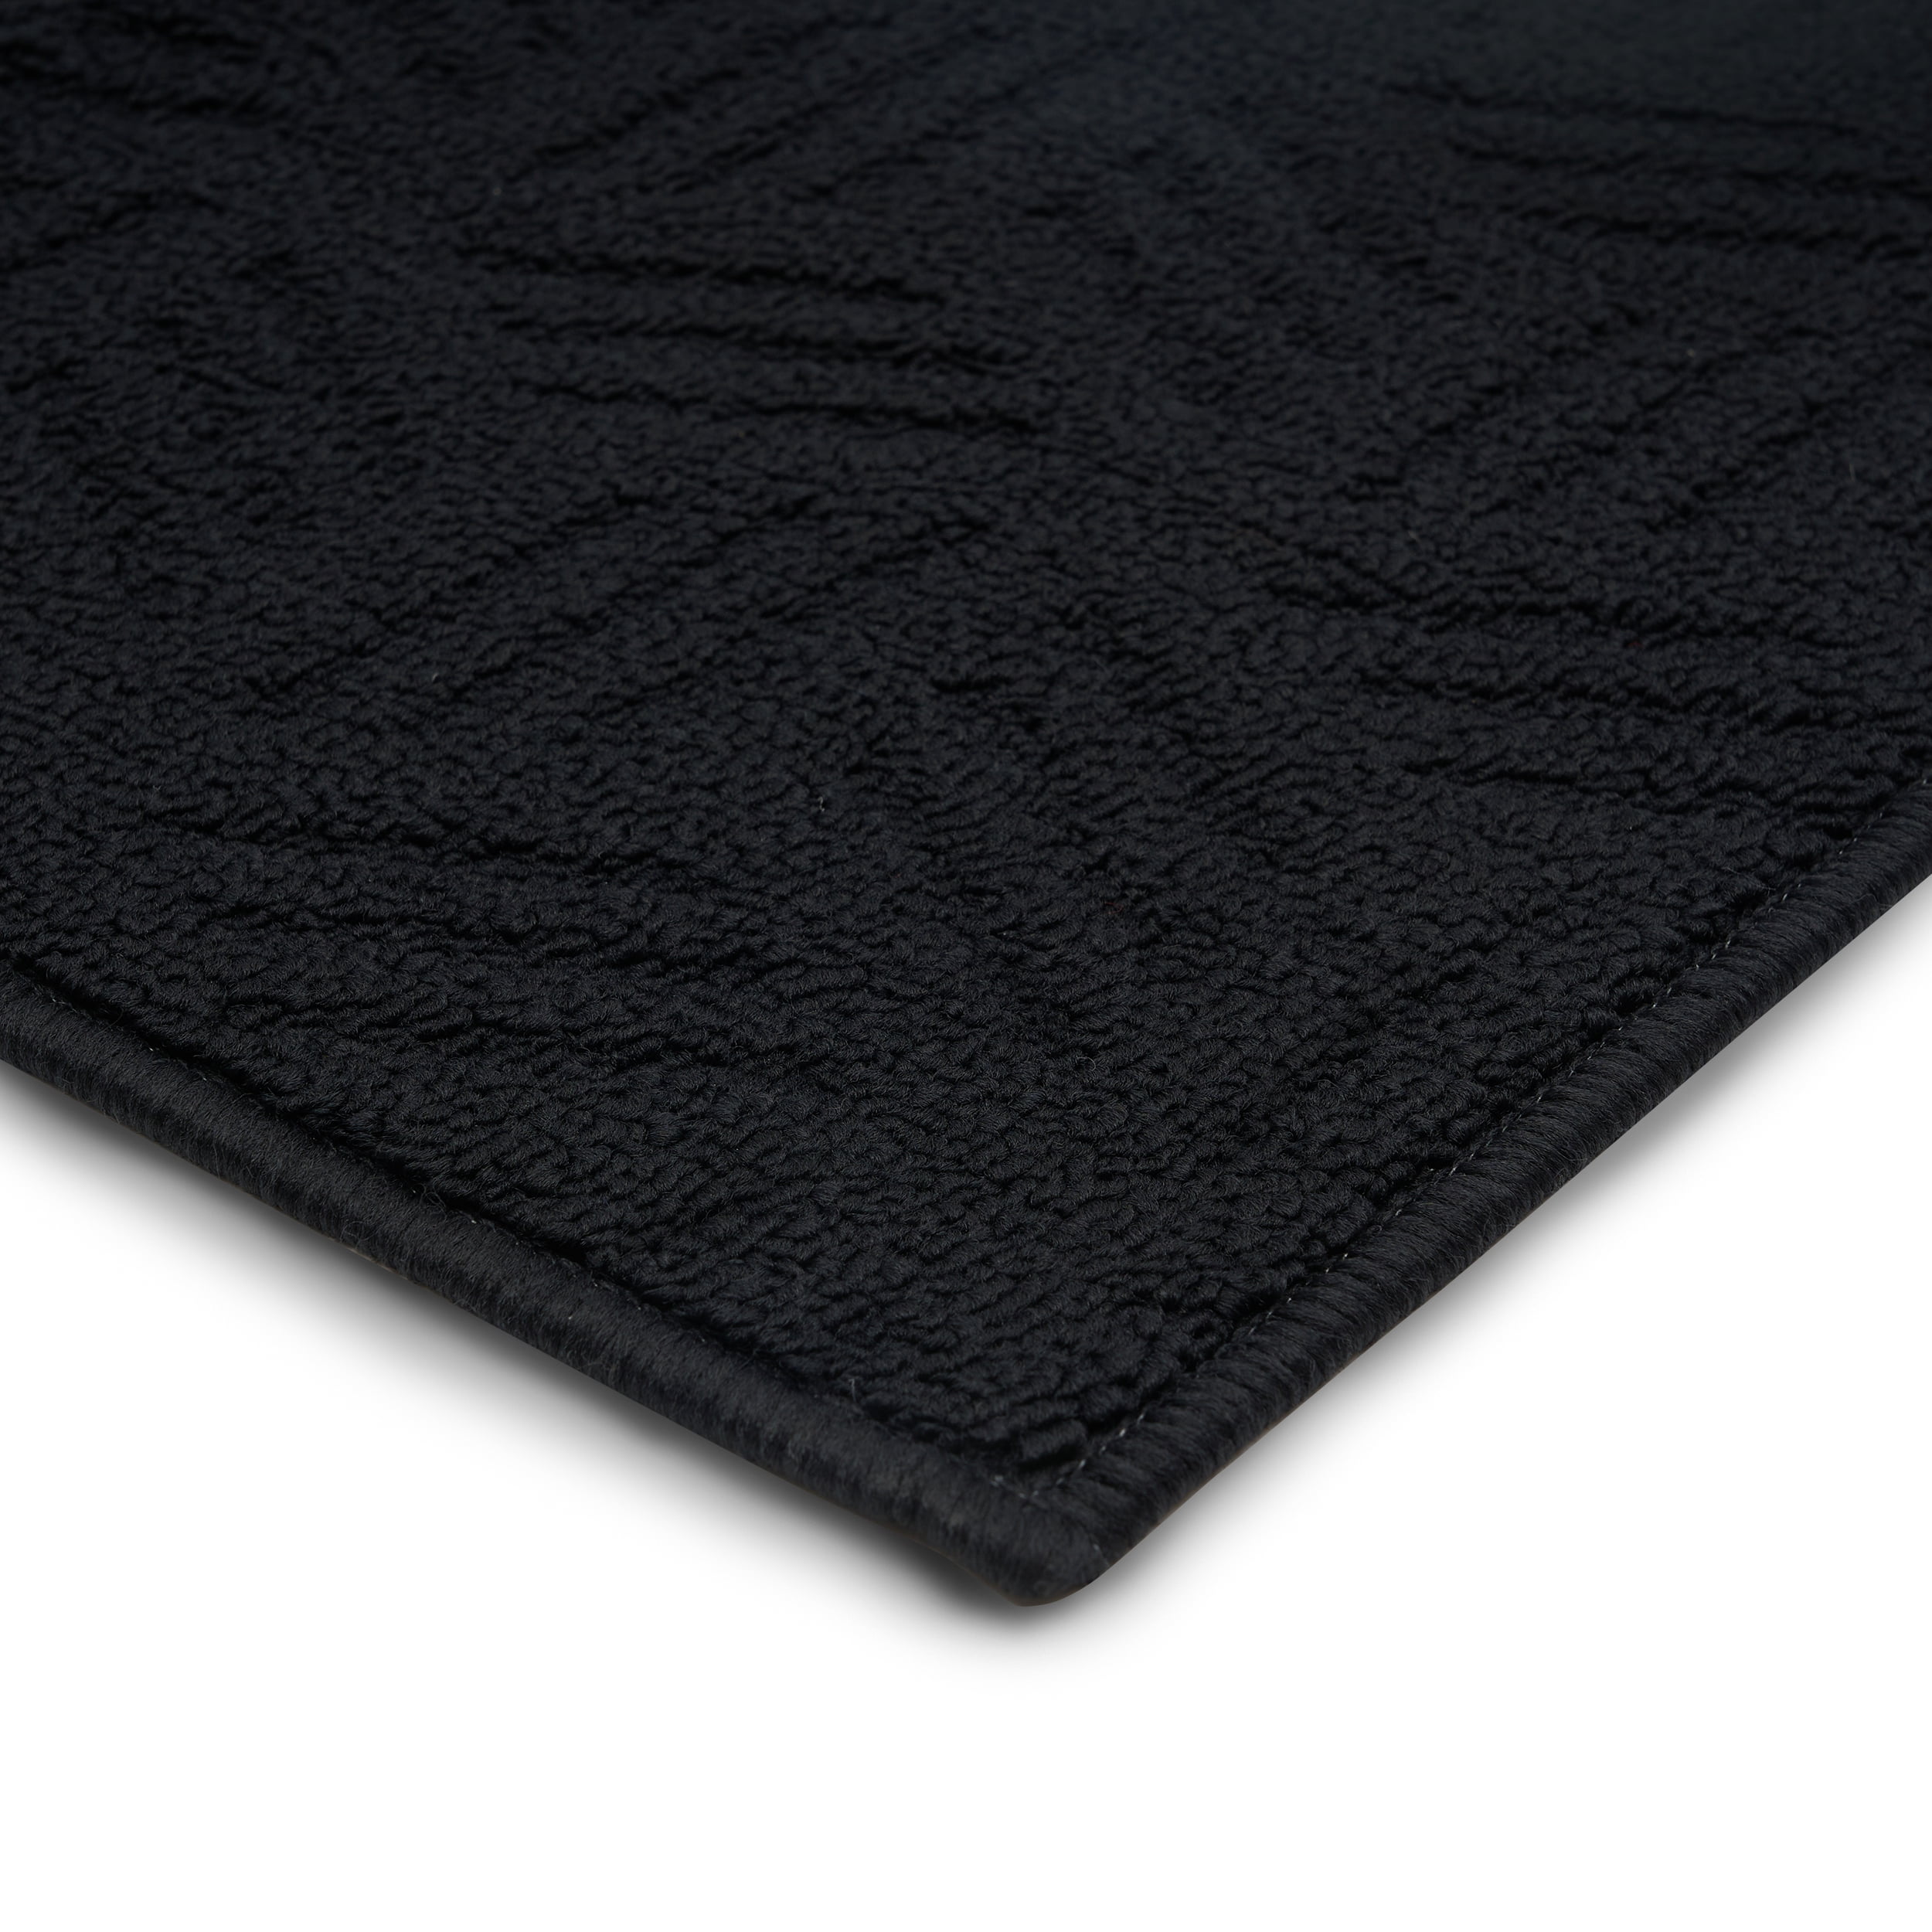 Mainstays Cushioned Solid Kitchen Mat, Rich Black, 20 x 45 - Runners, Facebook Marketplace